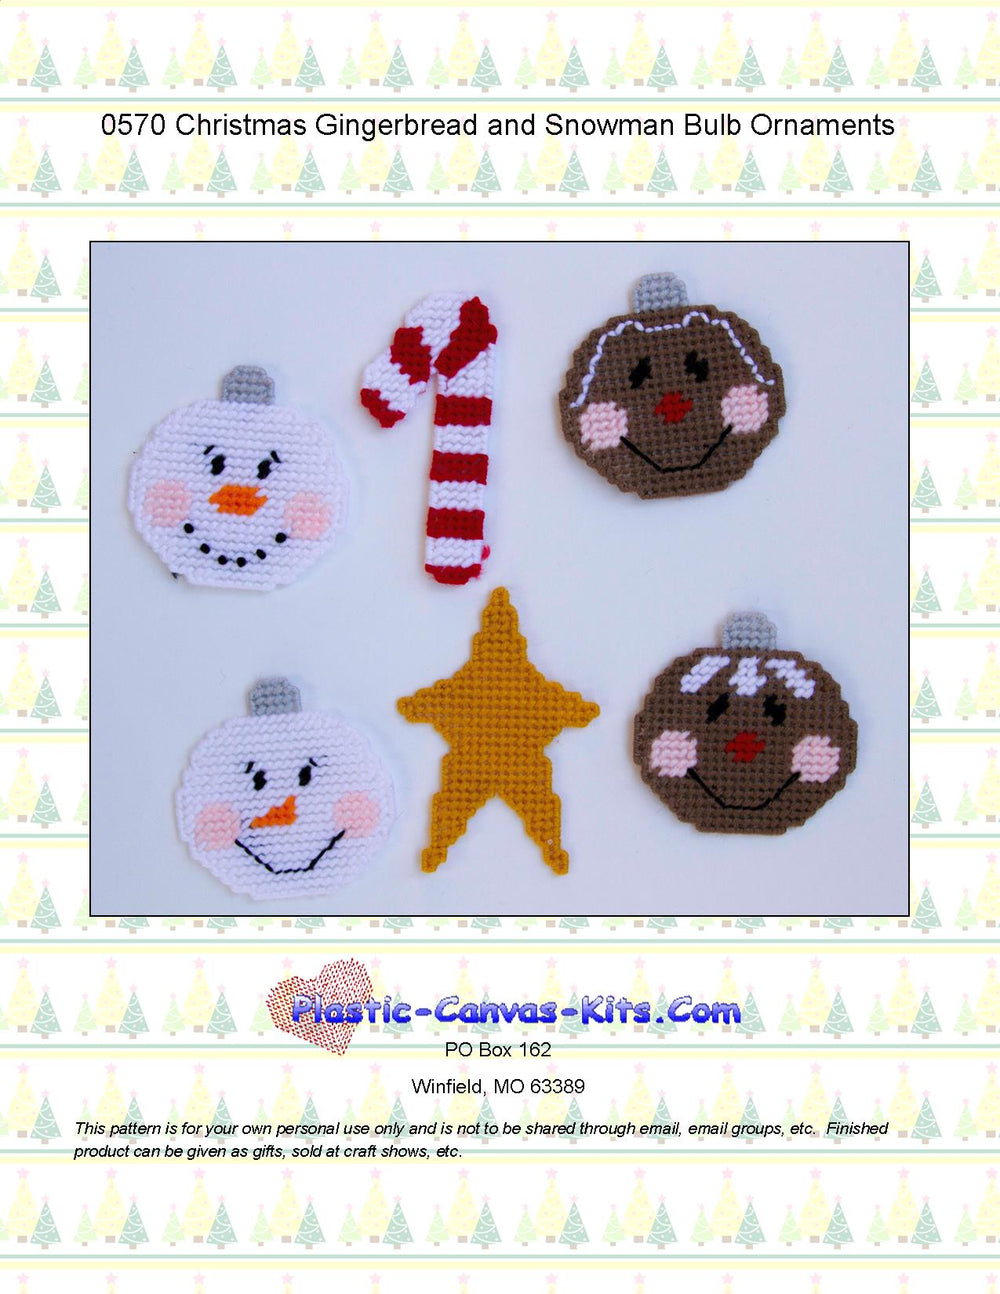 Snowman and Gingerbread Man Ornaments